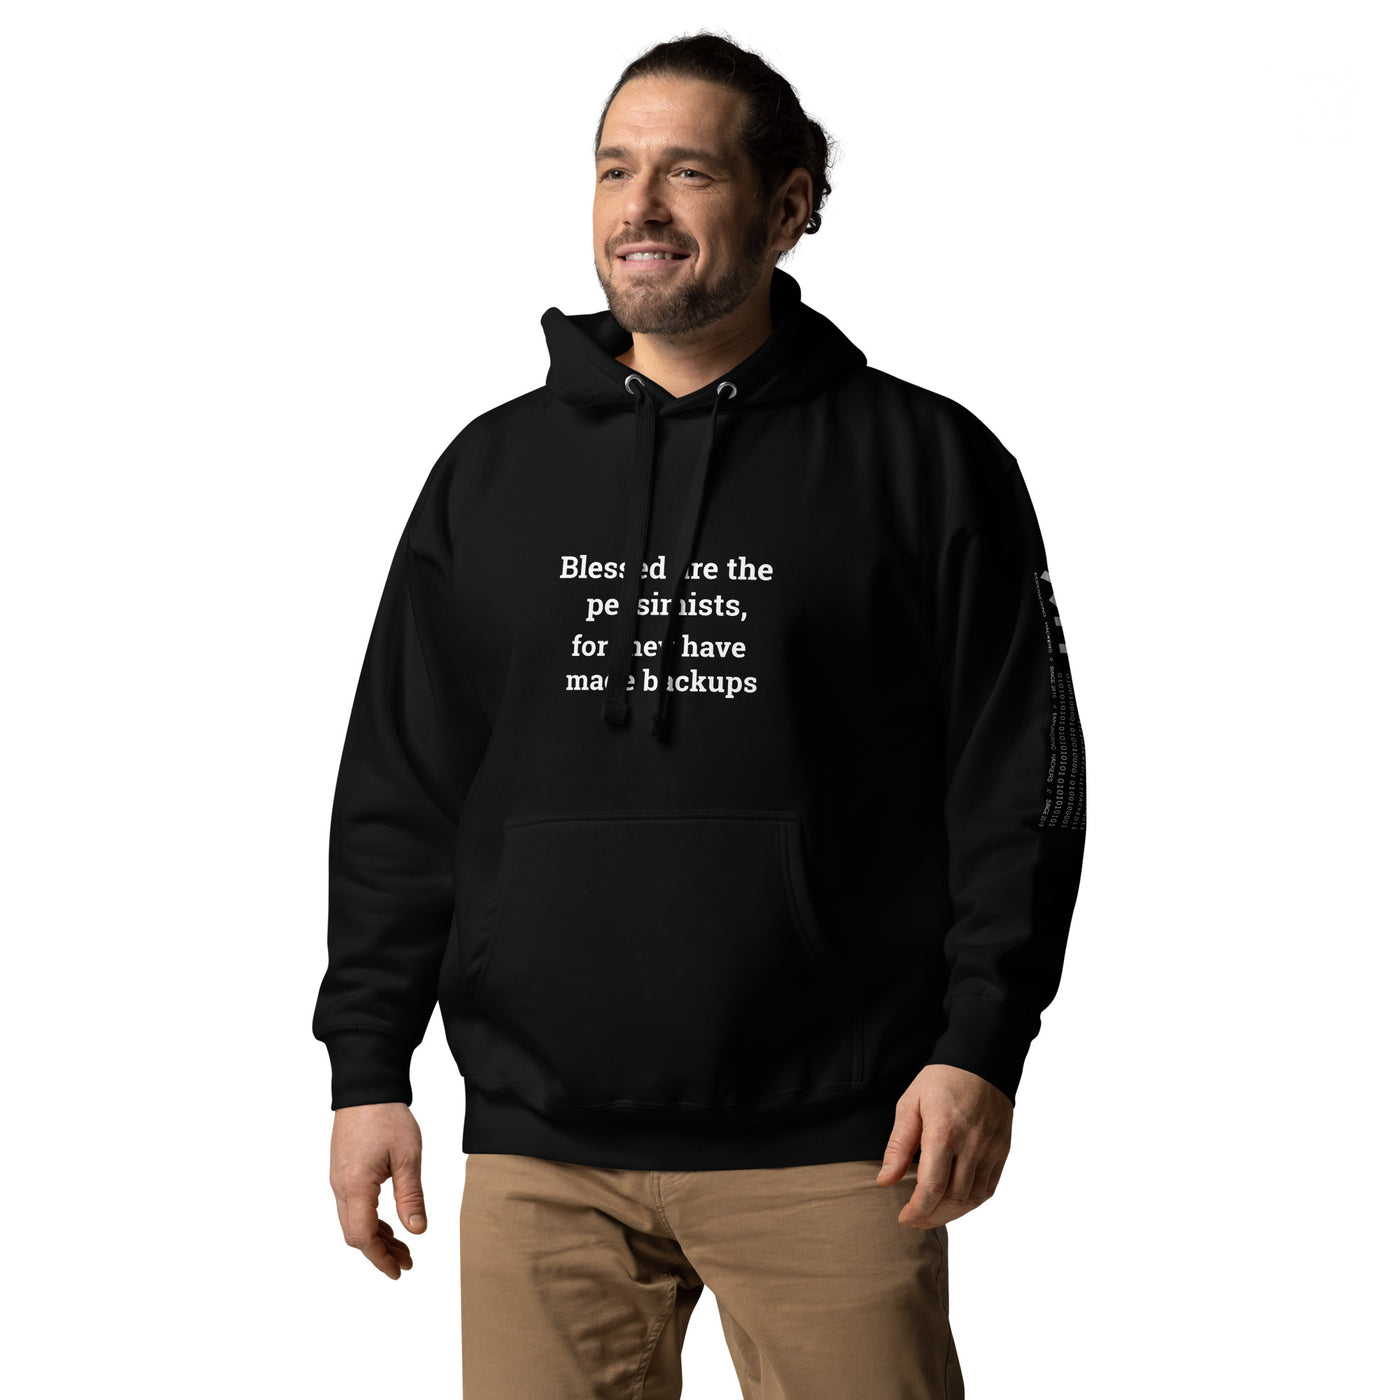 Blessed are the pessimists for they have made backups V1 - Unisex Hoodie